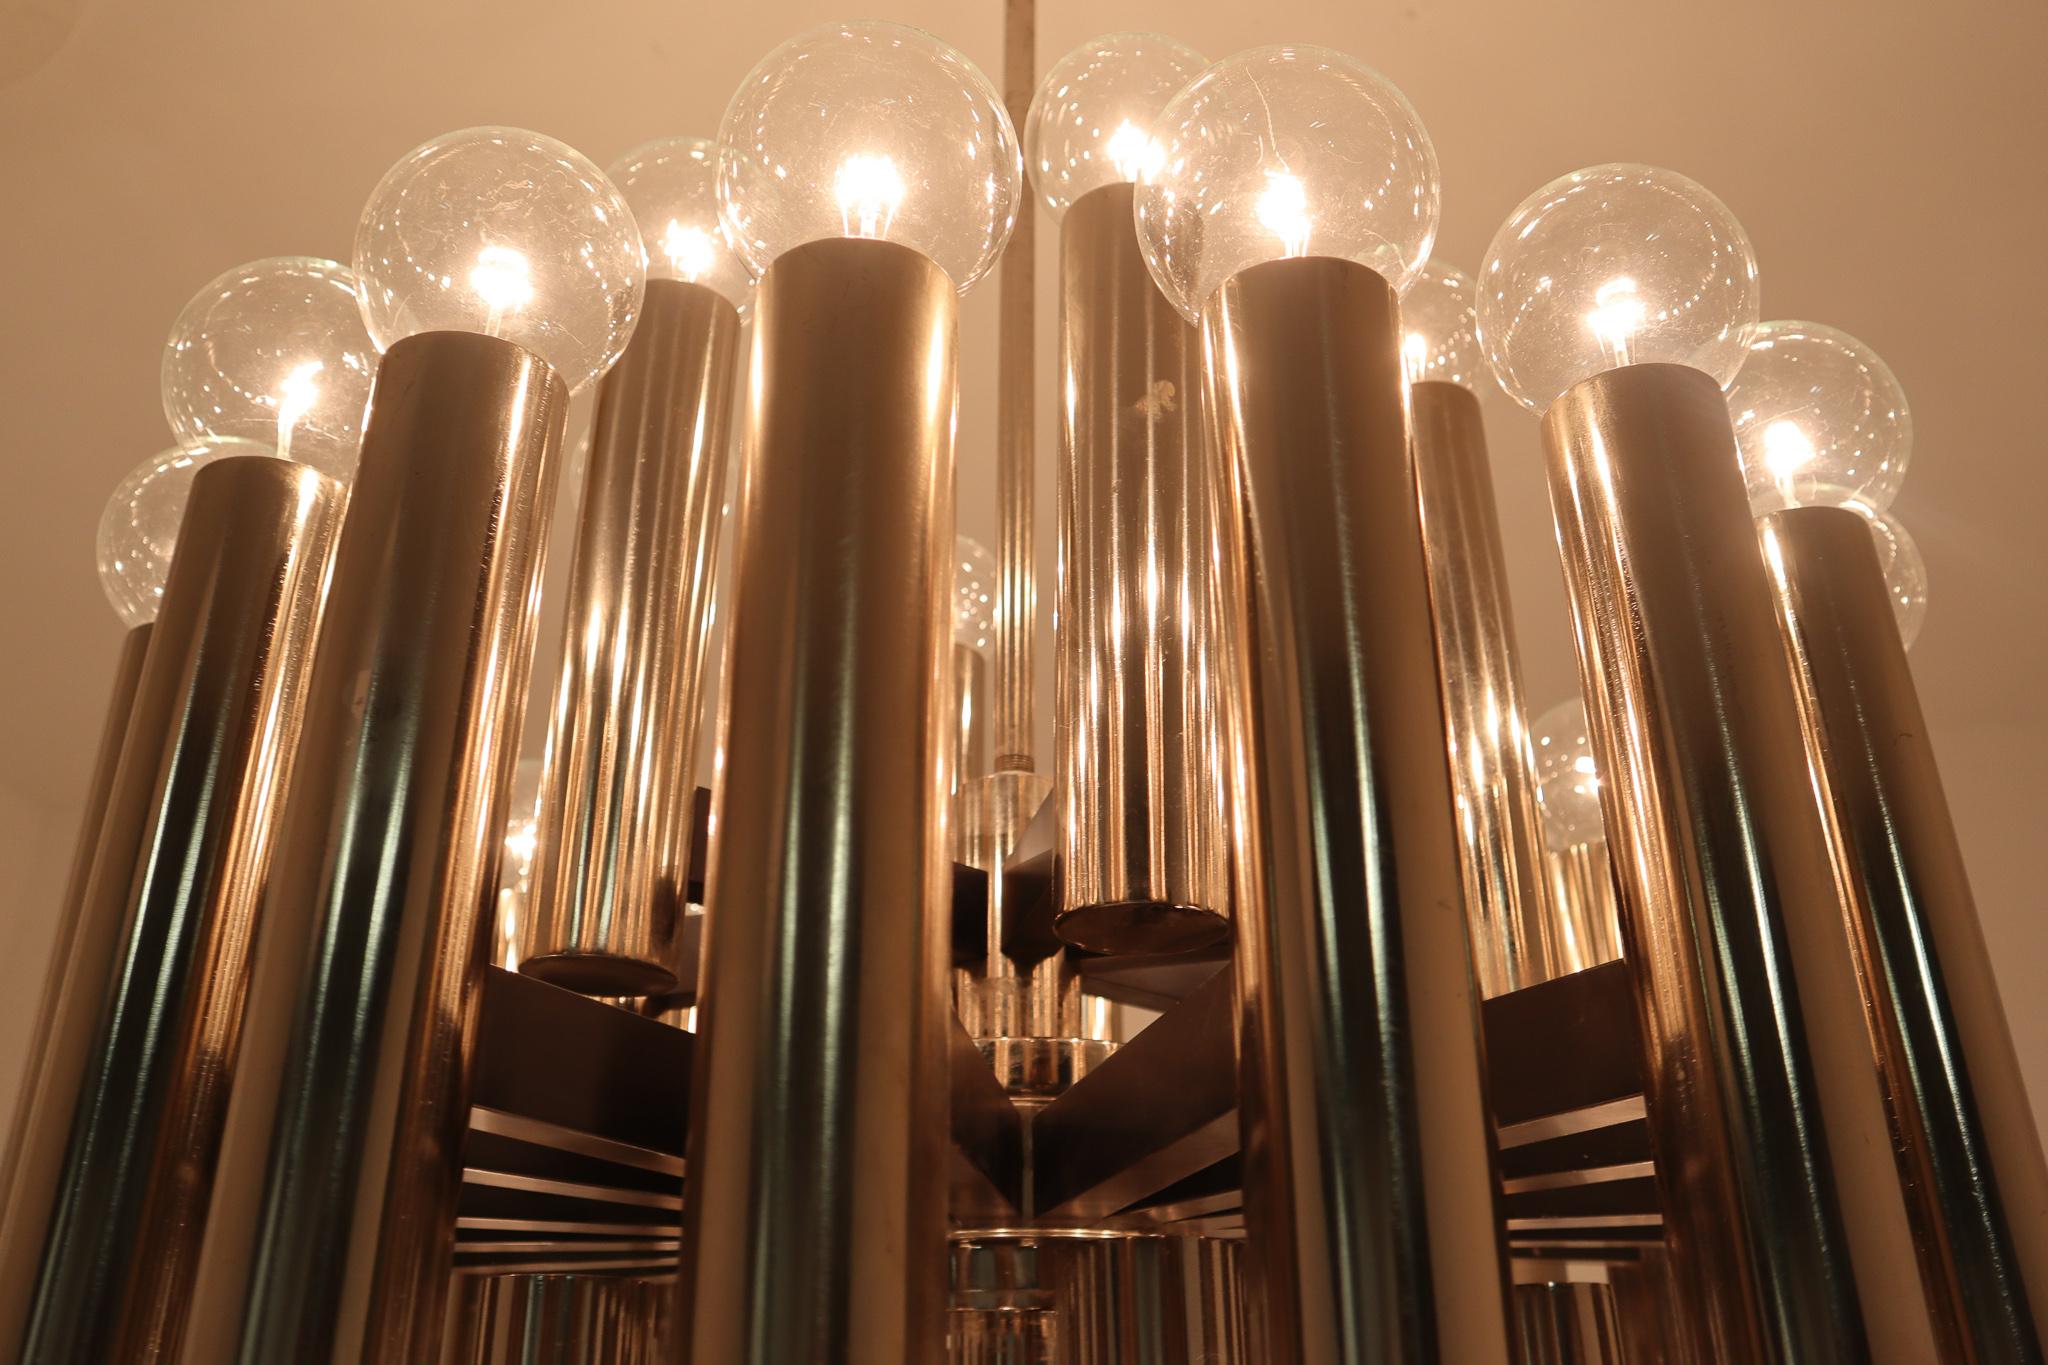 Midcentury modernist extreme large chandelier with 48-light bulbs. The fixture is made of metal with a steel-brass patina. Therefore an interesting color is visible on the metal. 48 large light bulbs are placed over four levels. A warm and diffuse